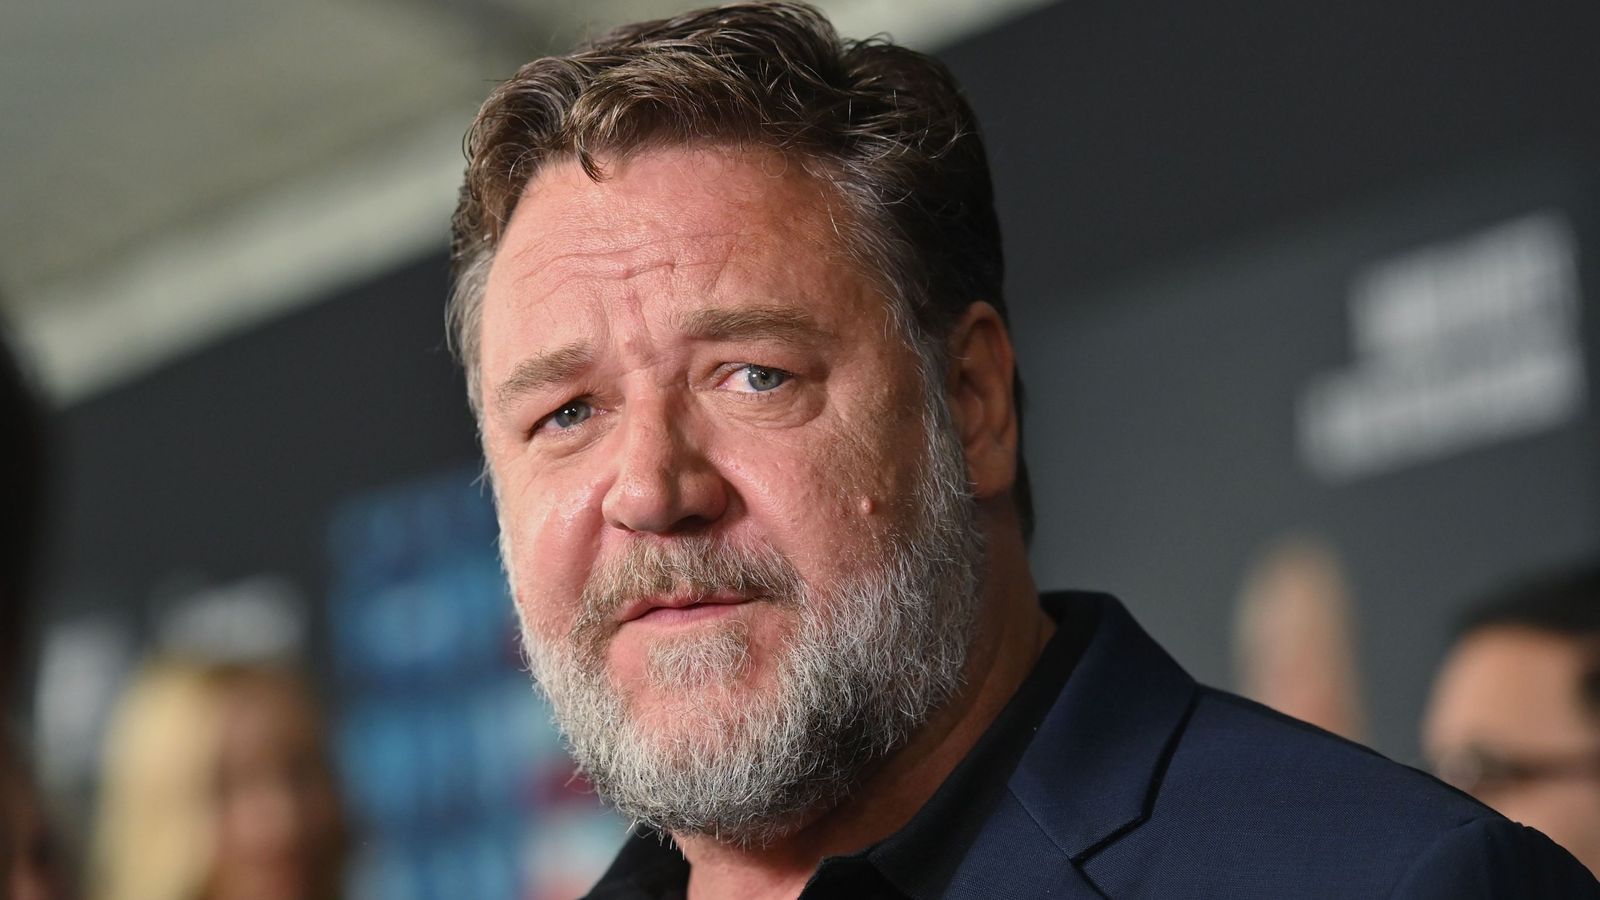 Russell Crowe donates nearly £3,000 to student who could not afford